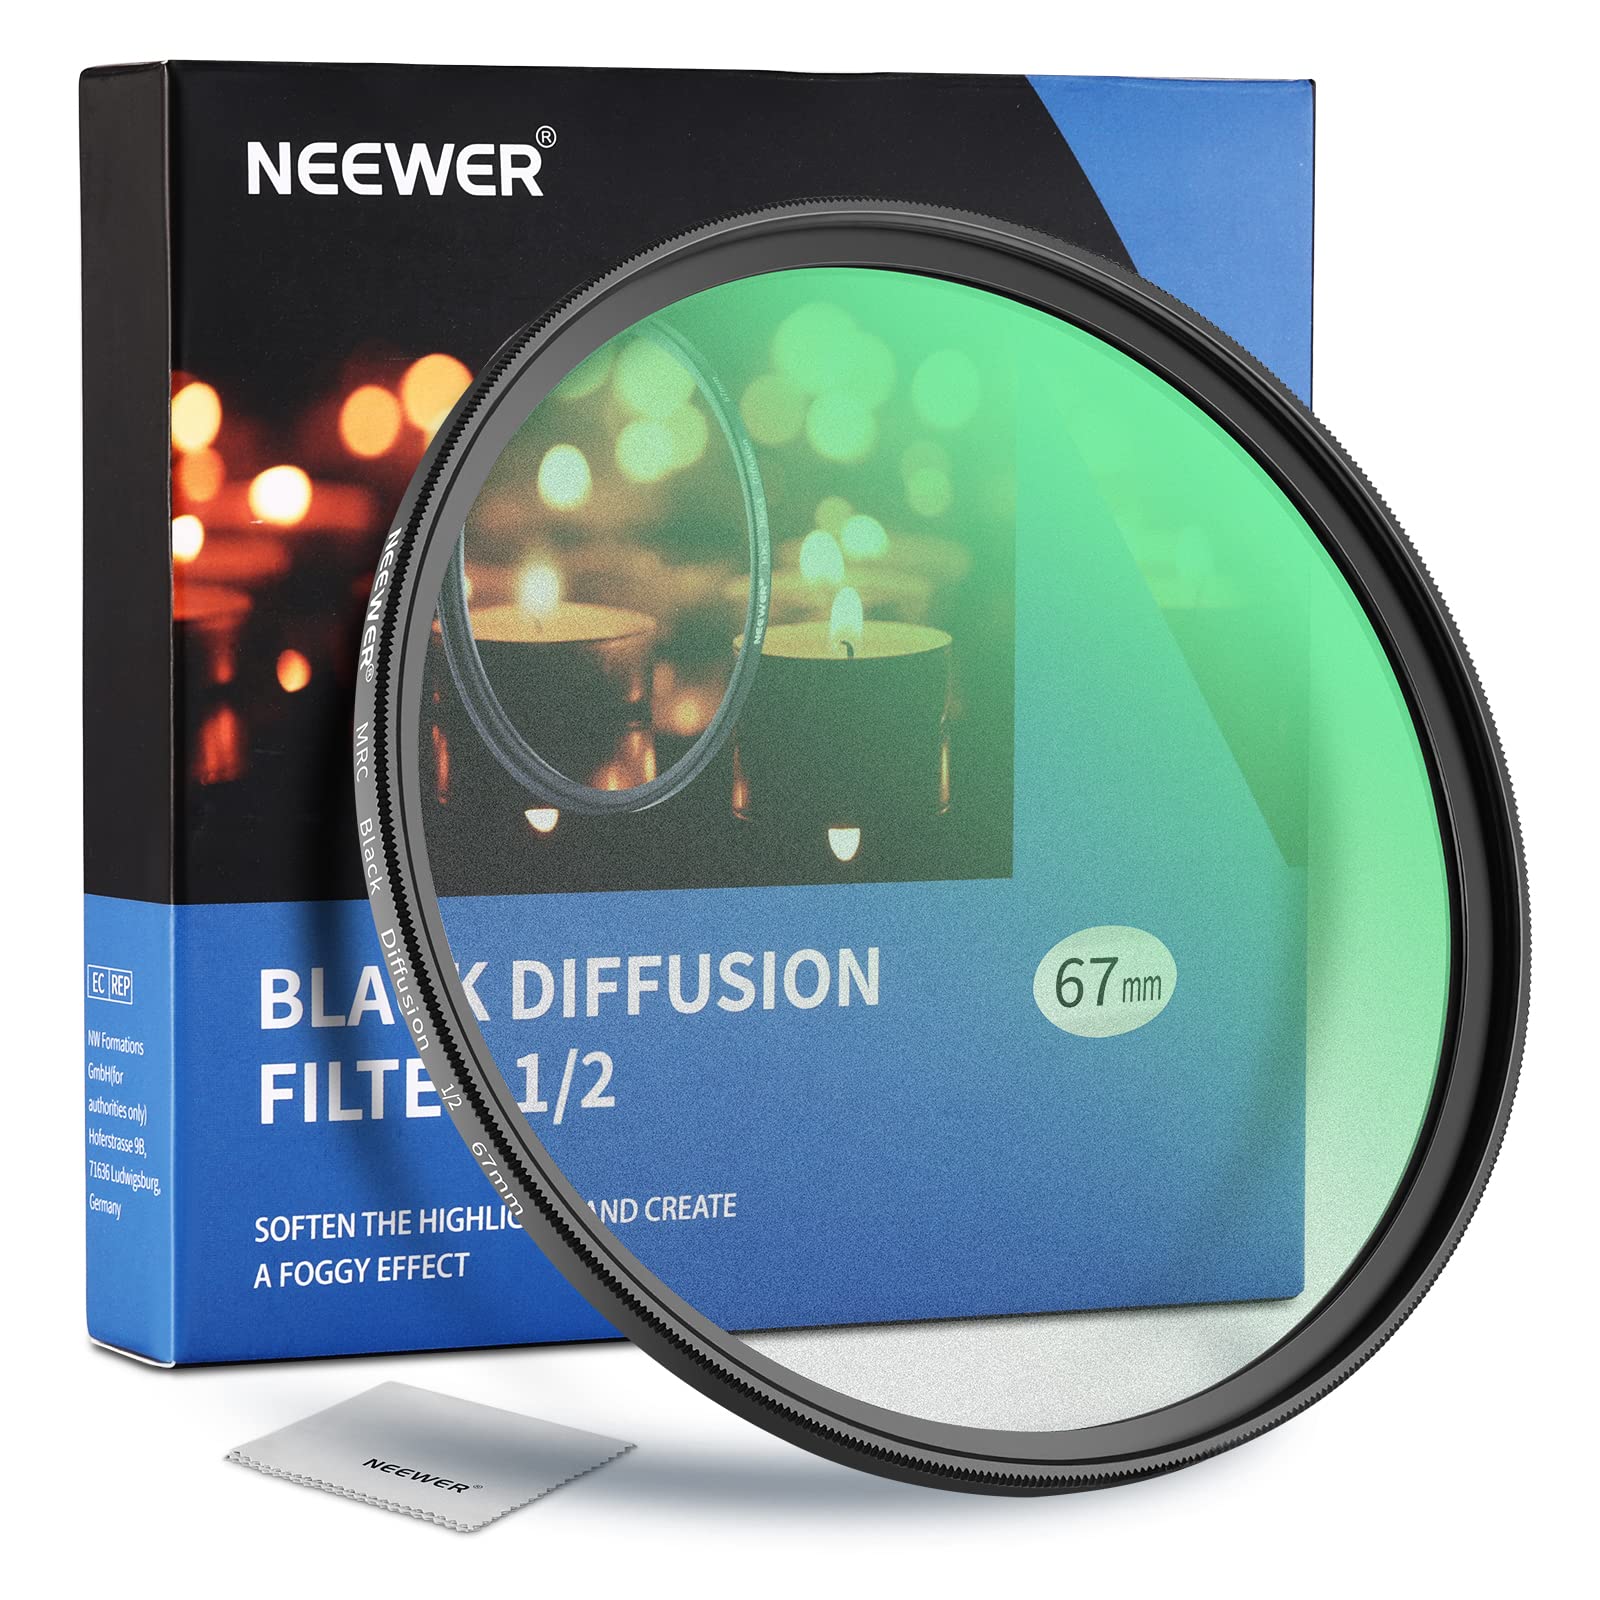 NEEWER 67mm Black Diffusion 1/2 Filter Mist Dreamy Cinematic Effect Filter Ultra Slim Water Repellent Scratch Resistant HD Optical Glass, 30 Layers Nano Coatings for Video/Vlog/Portrait Photography